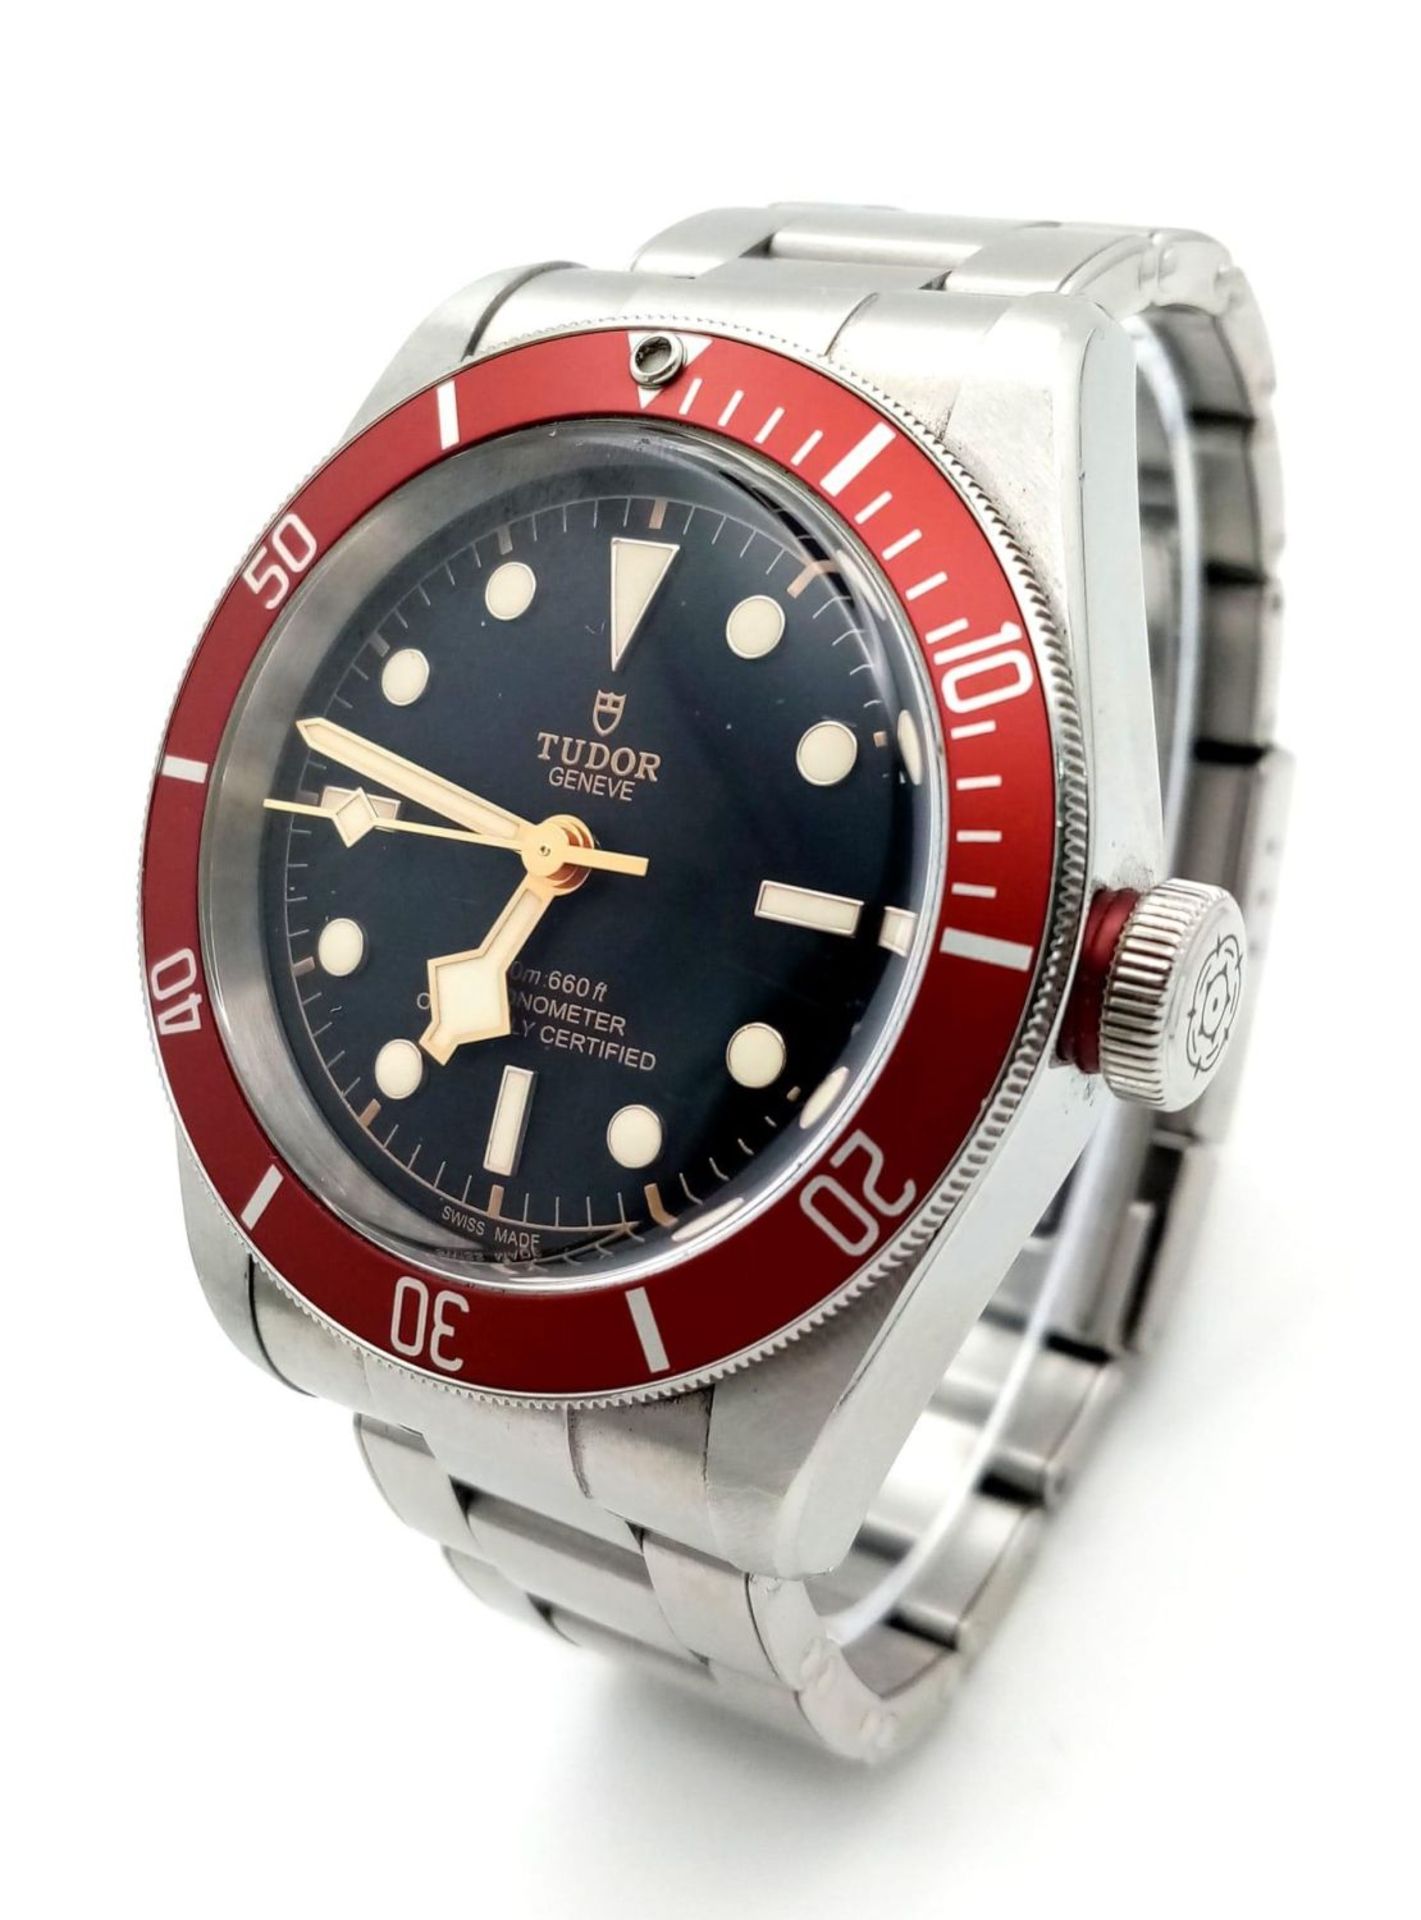 A Classic Tudor Black Bay Automatic Gents Watch. Stainless steel bracelet and case - 41mm. Black